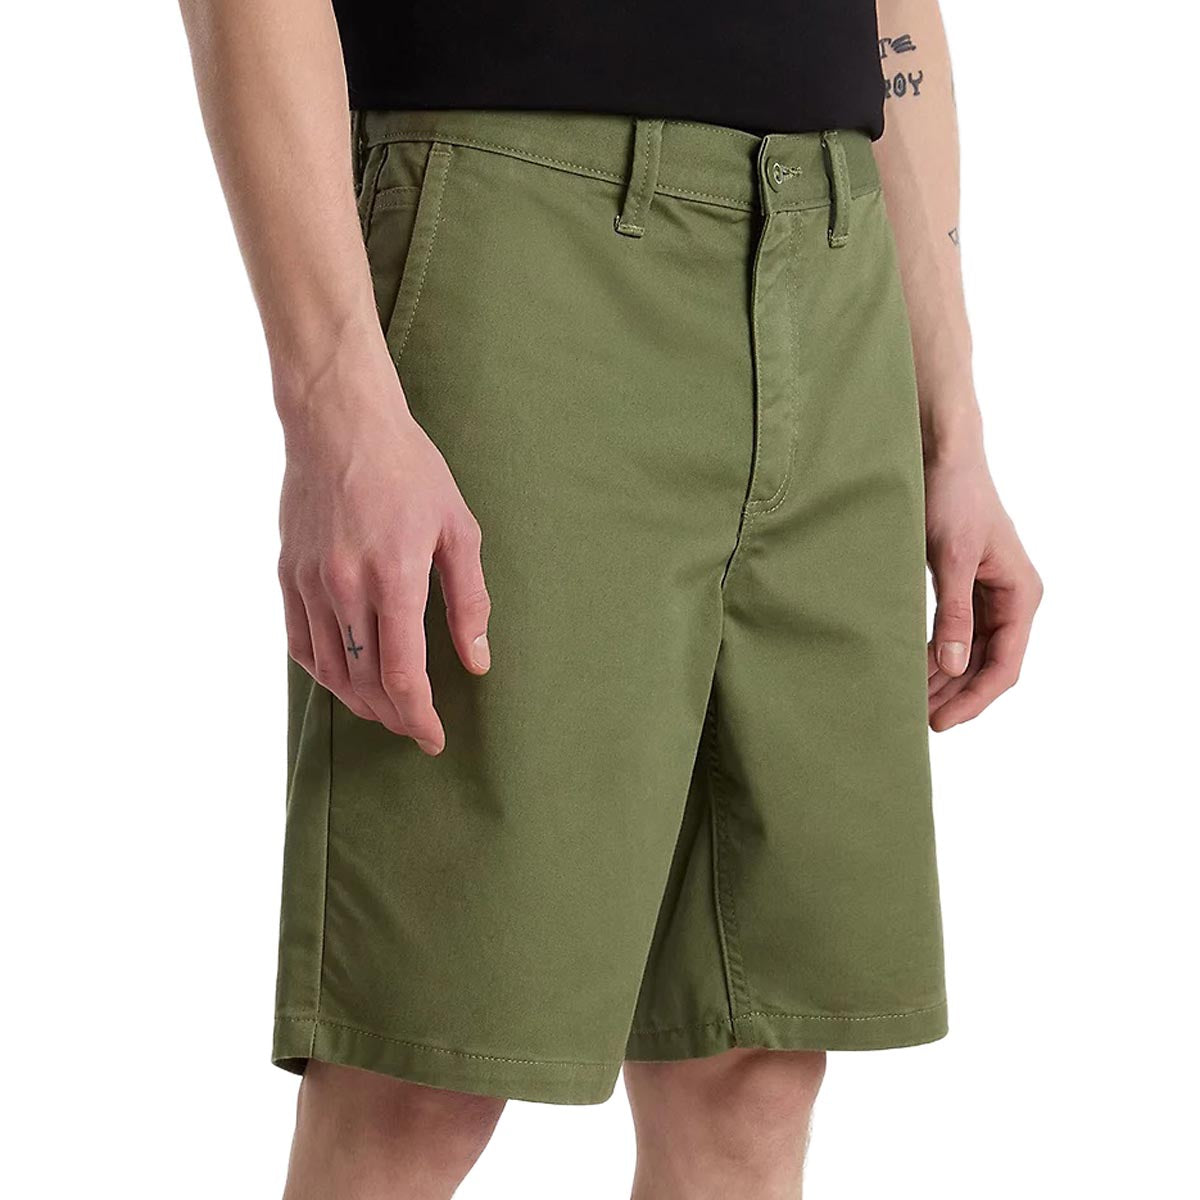 Vans Authentic Chino Relaxed Shorts - Olivine image 3